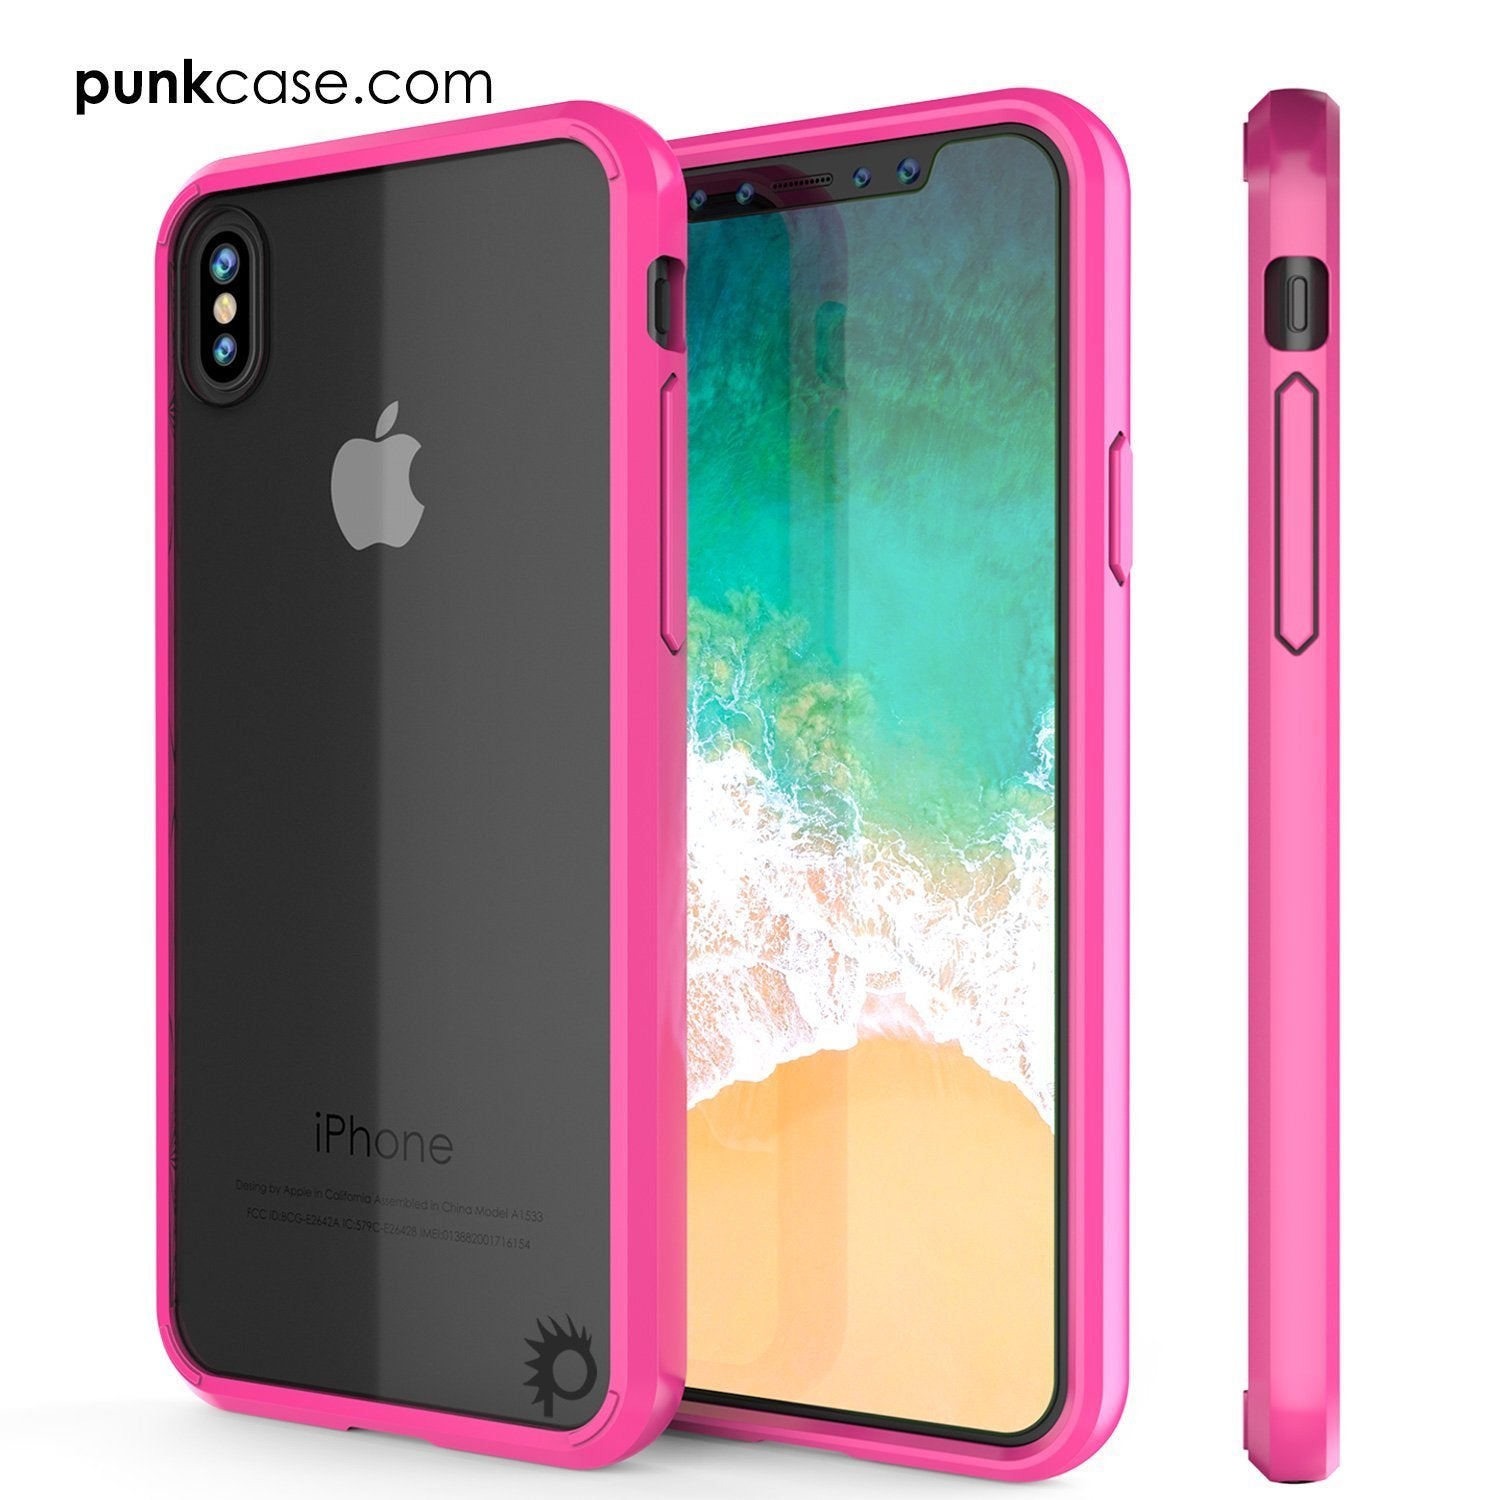 iPhone XR Case, PUNKcase [Lucid 2.0 Series] [Slim Fit] Armor Cover [Pink]